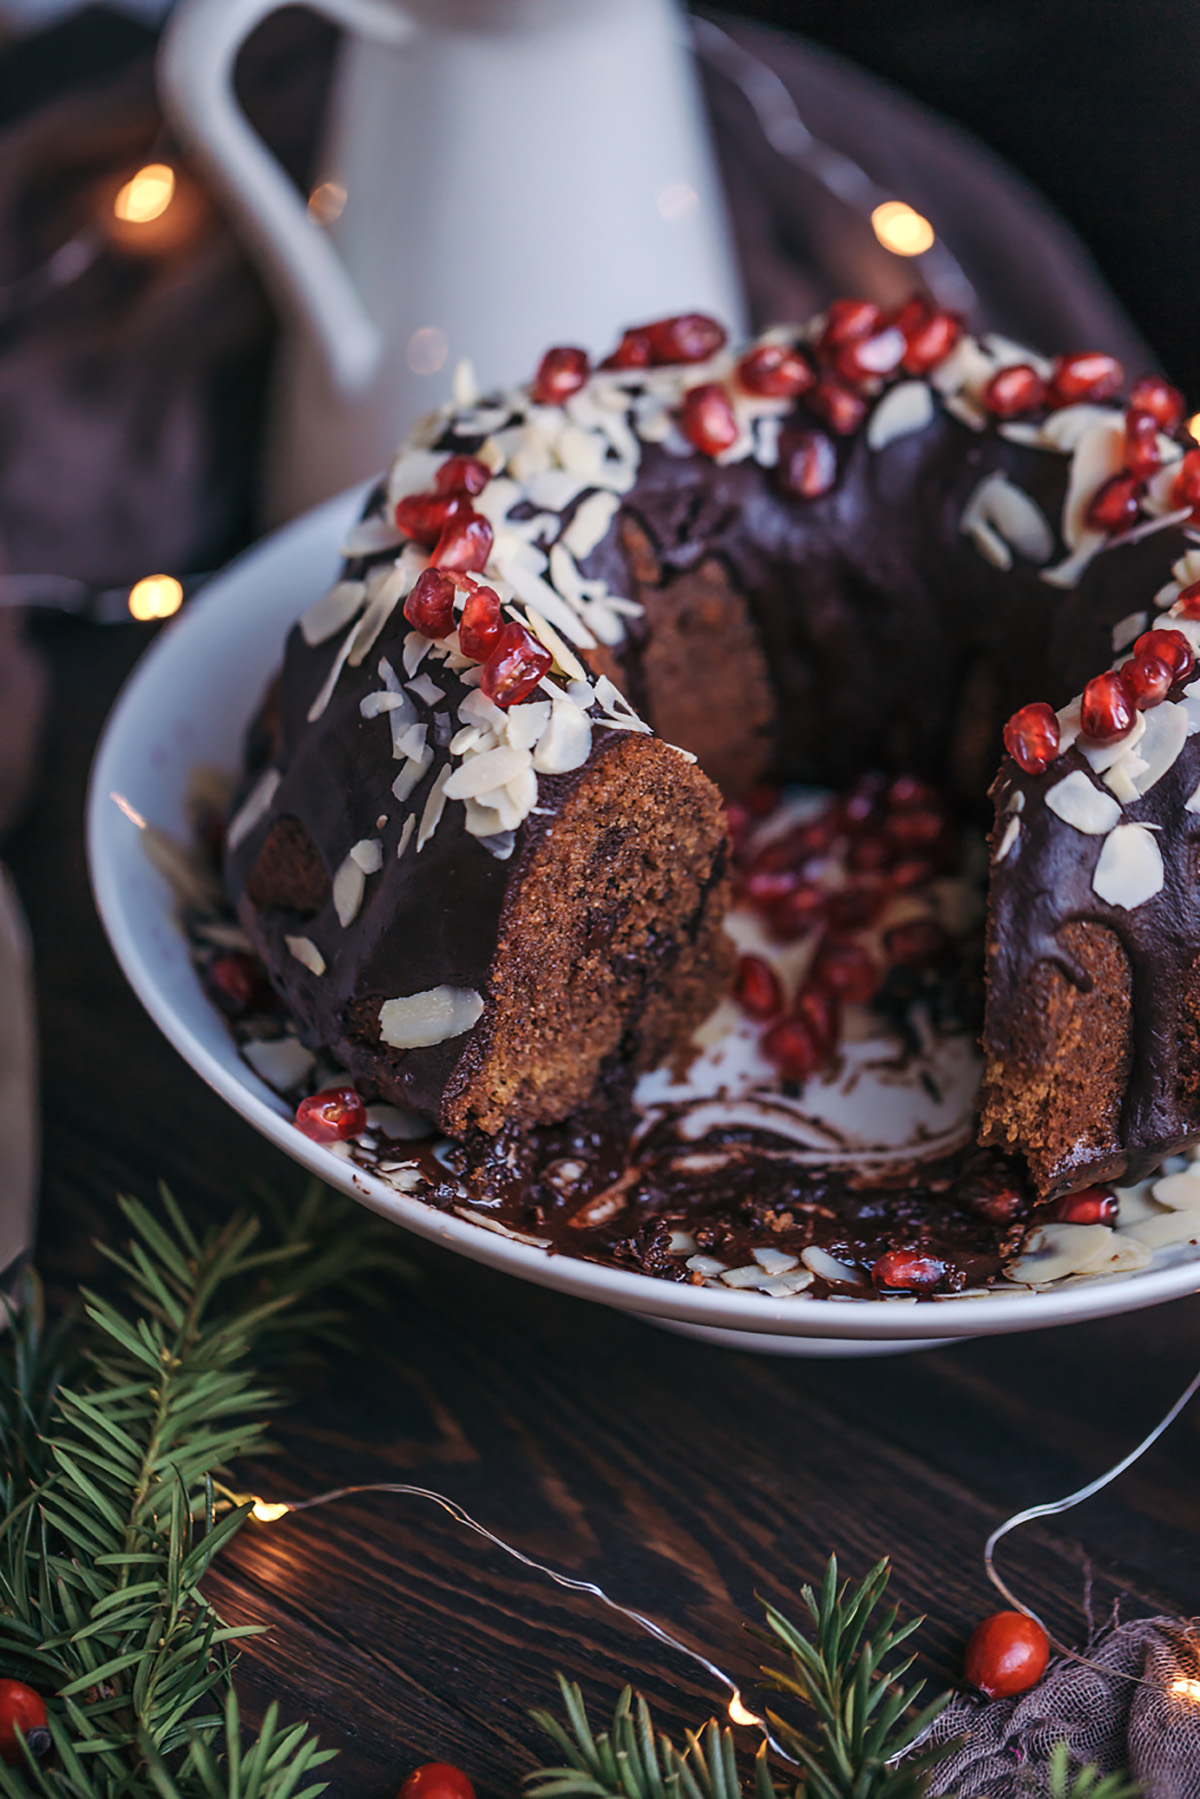 chocolate bundt cake (with coconut oil)